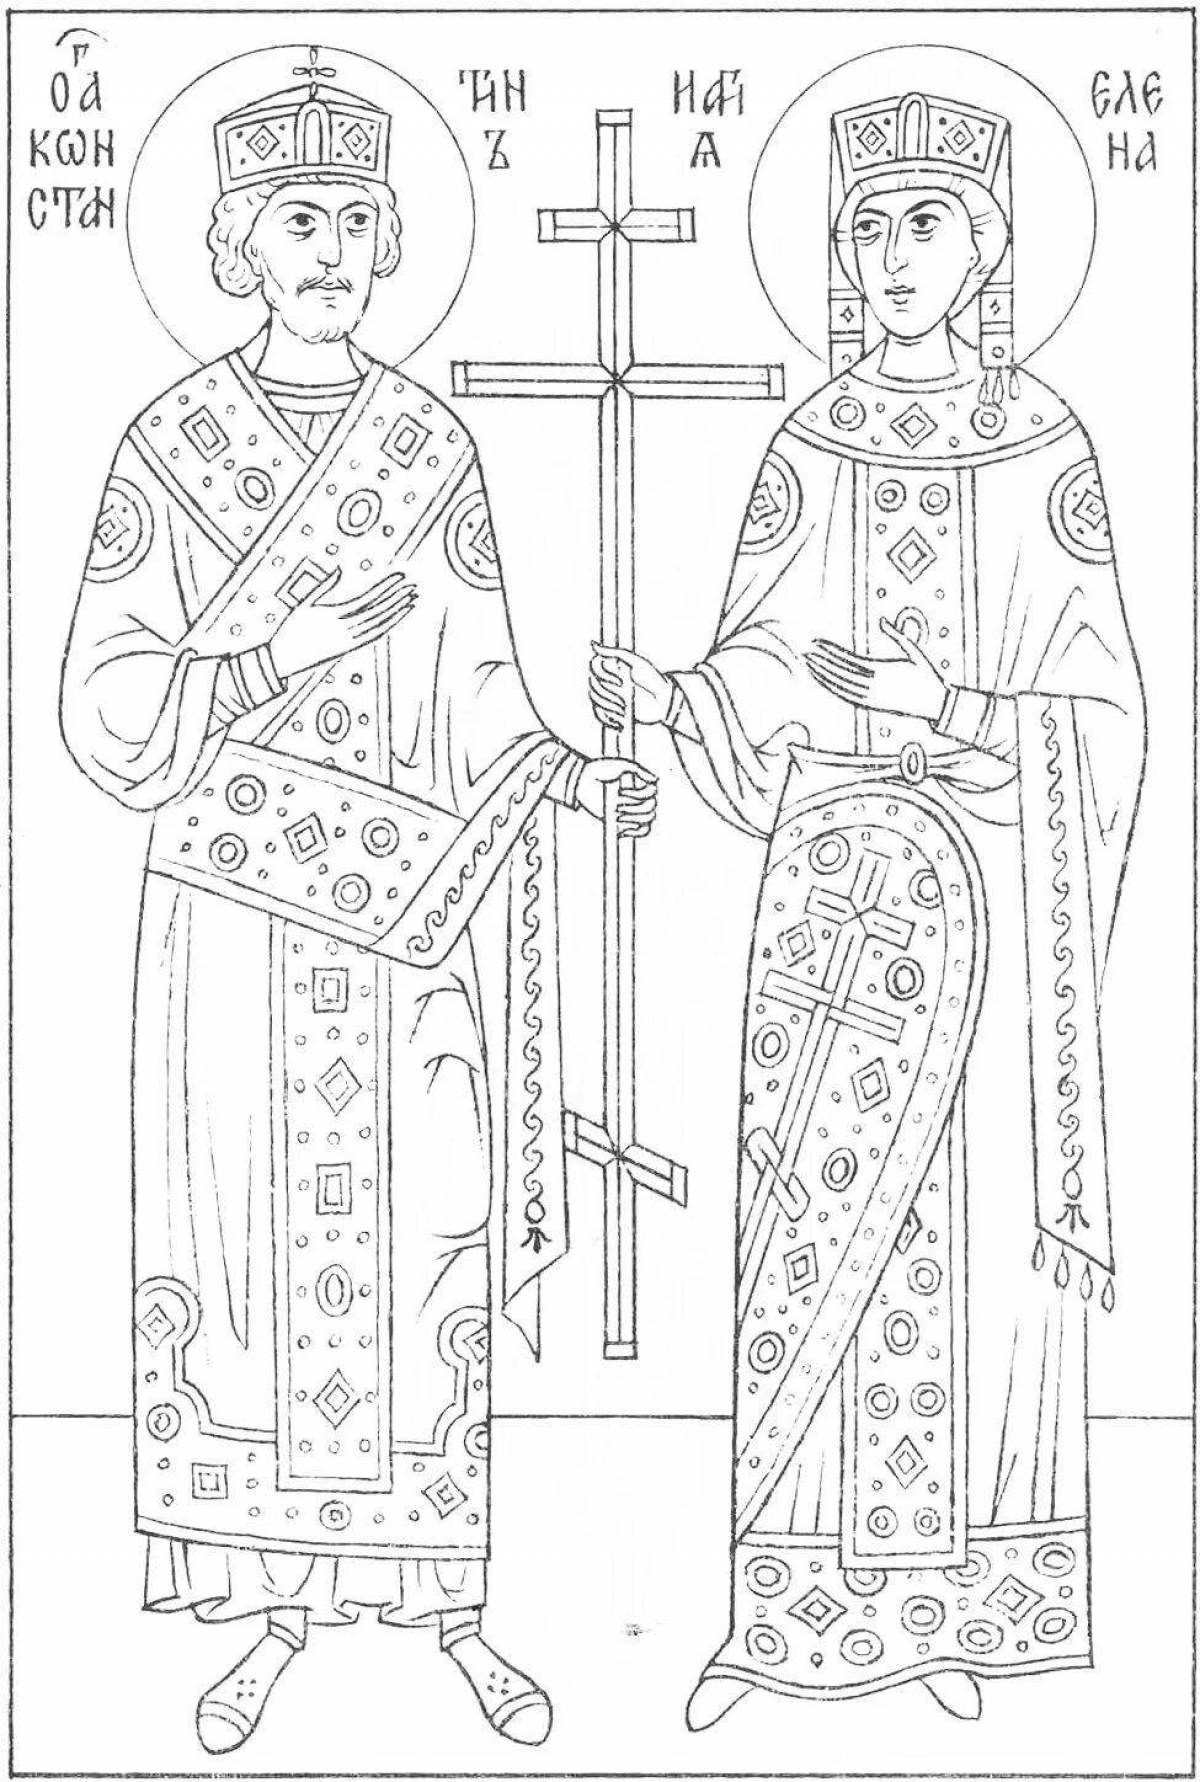 Funny coloring pages cyril and methodius